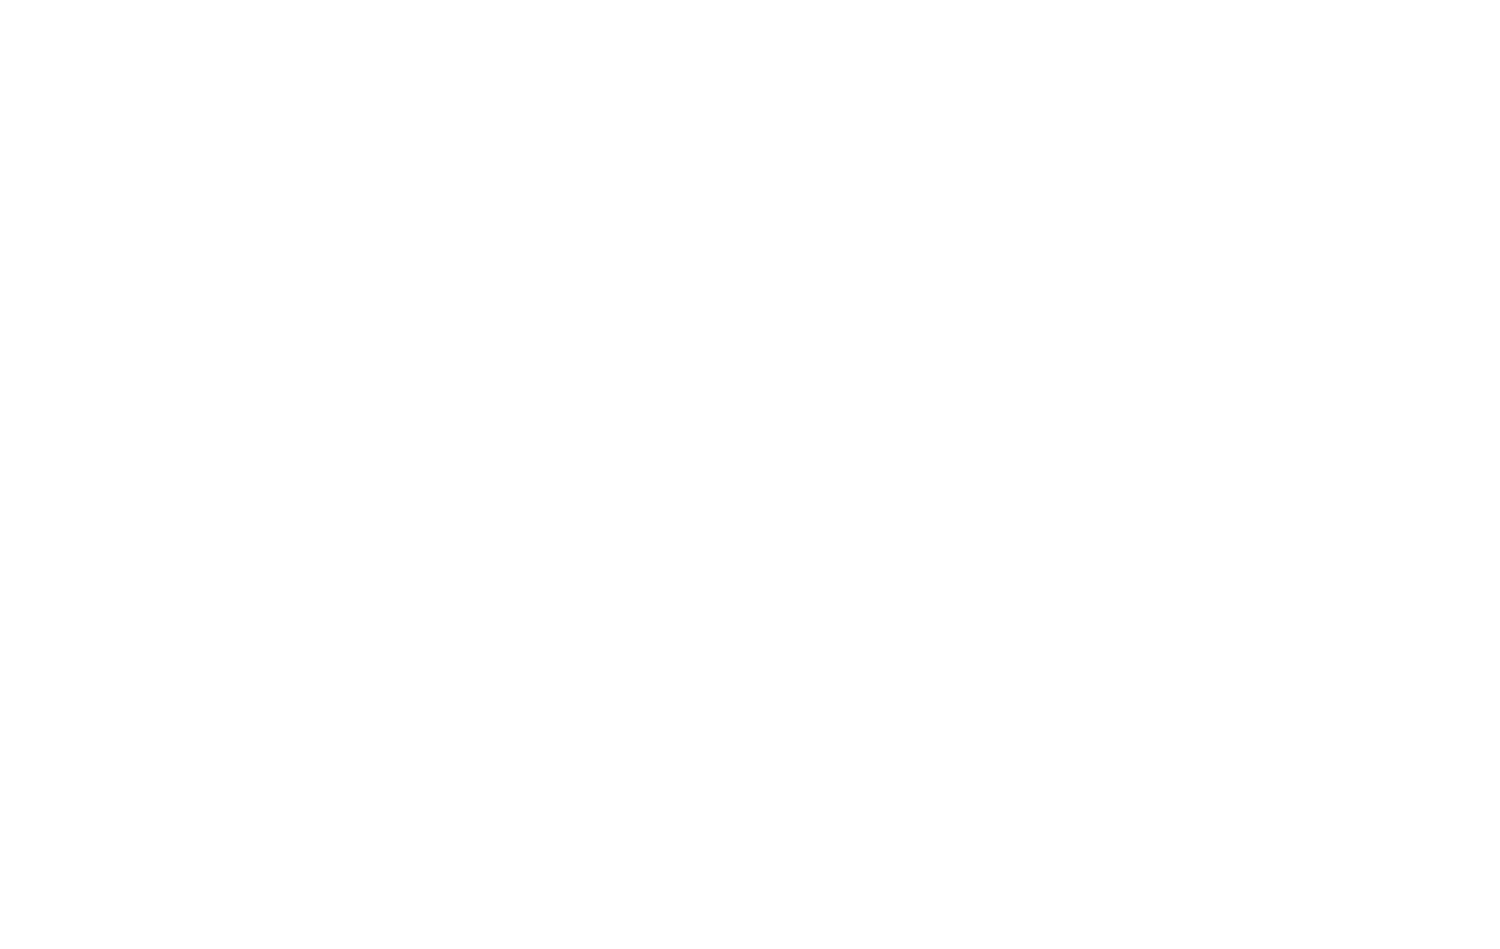 WellHaus Chiropractic